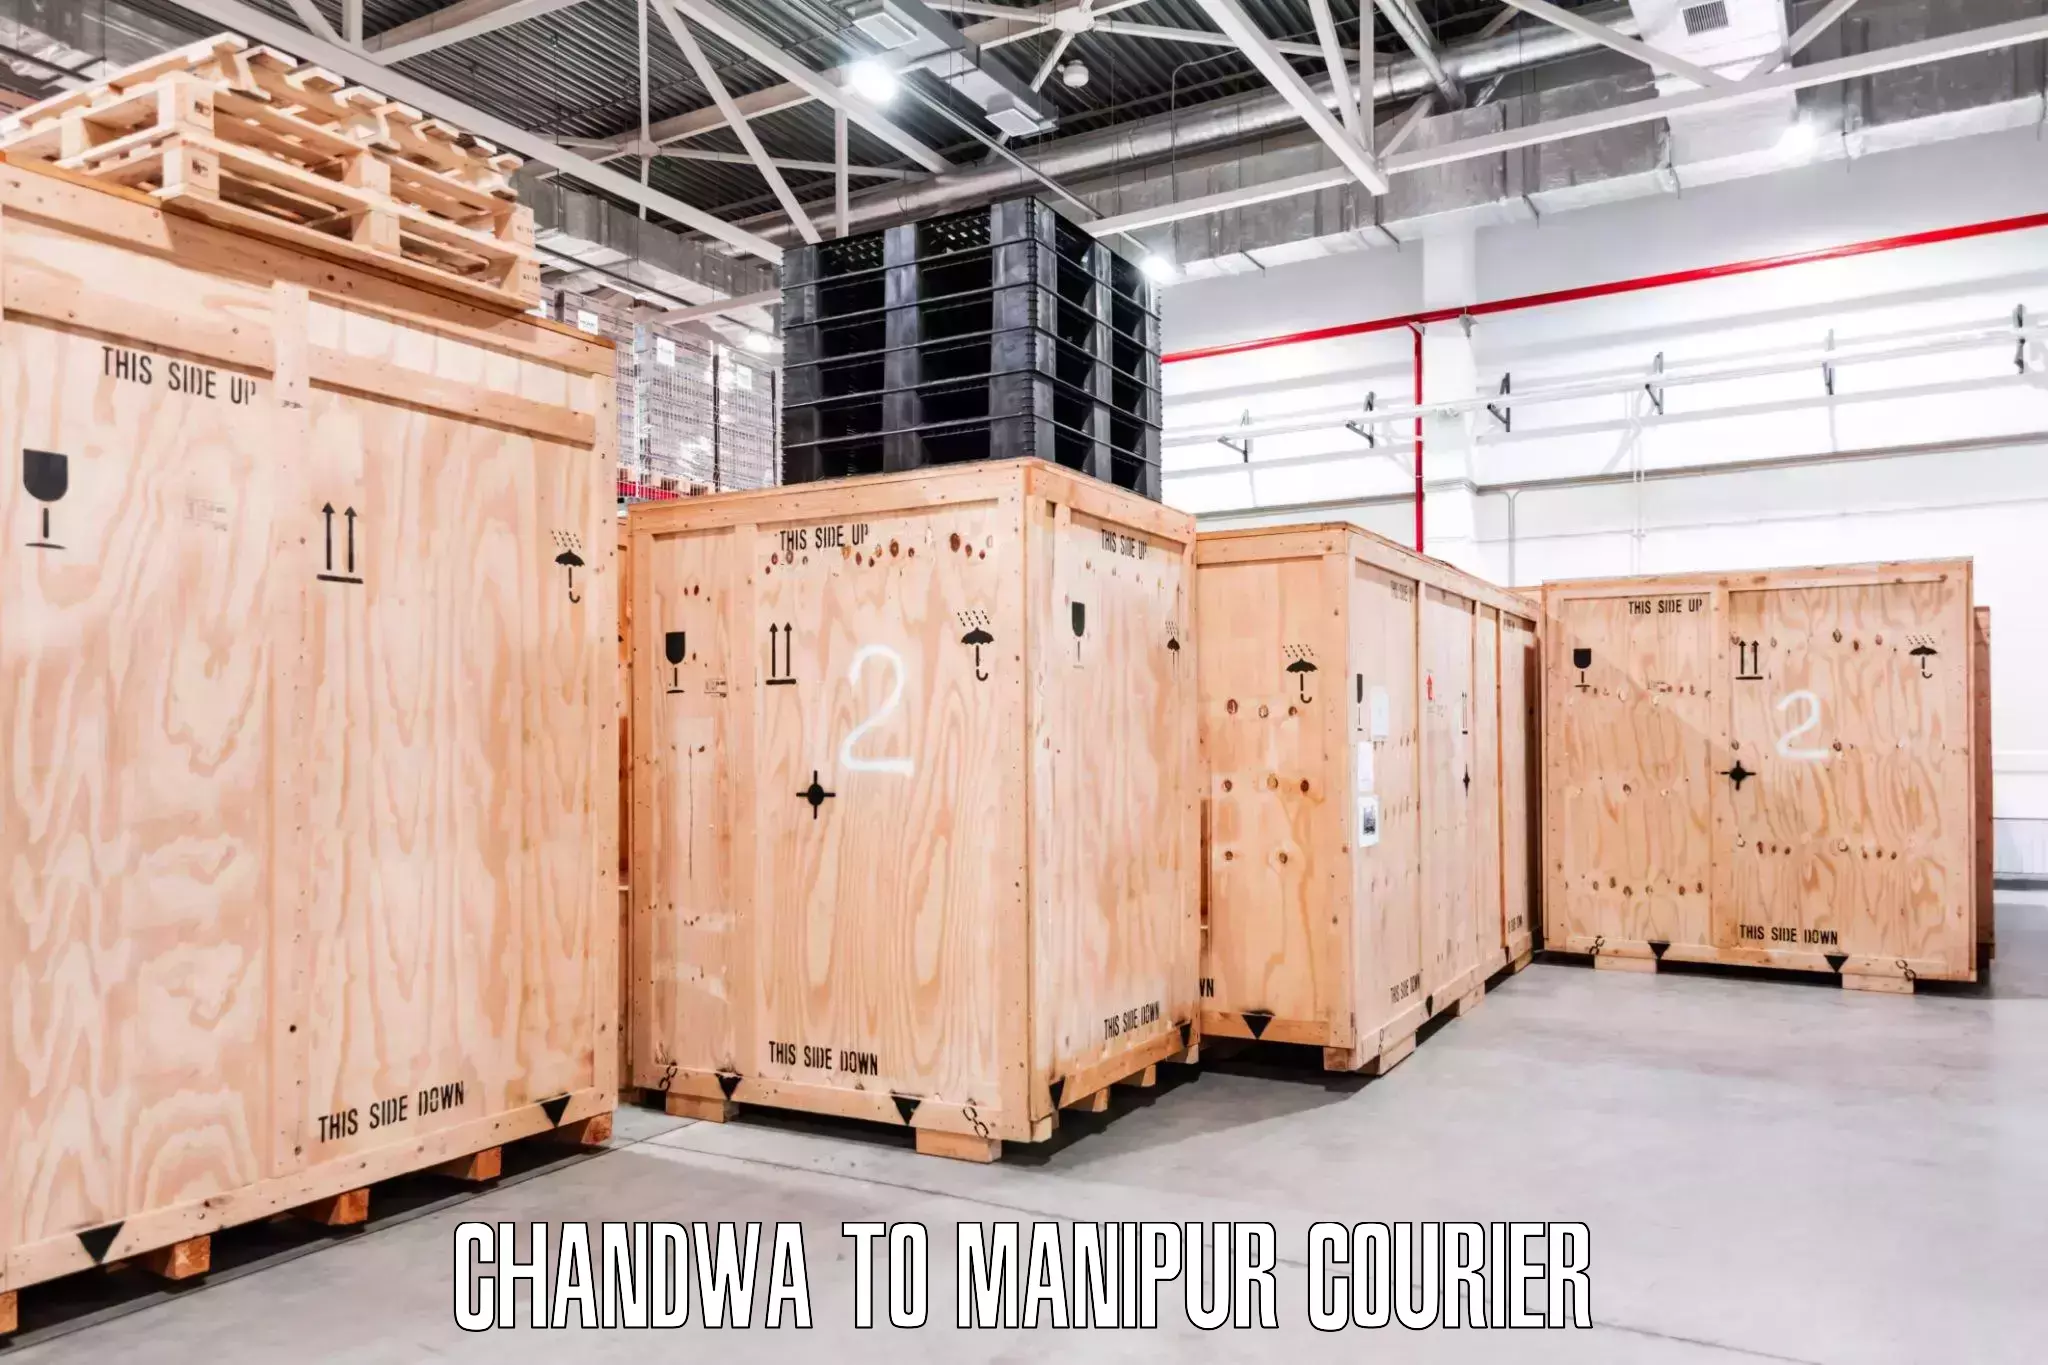 Expert packing and moving in Chandwa to Chandel